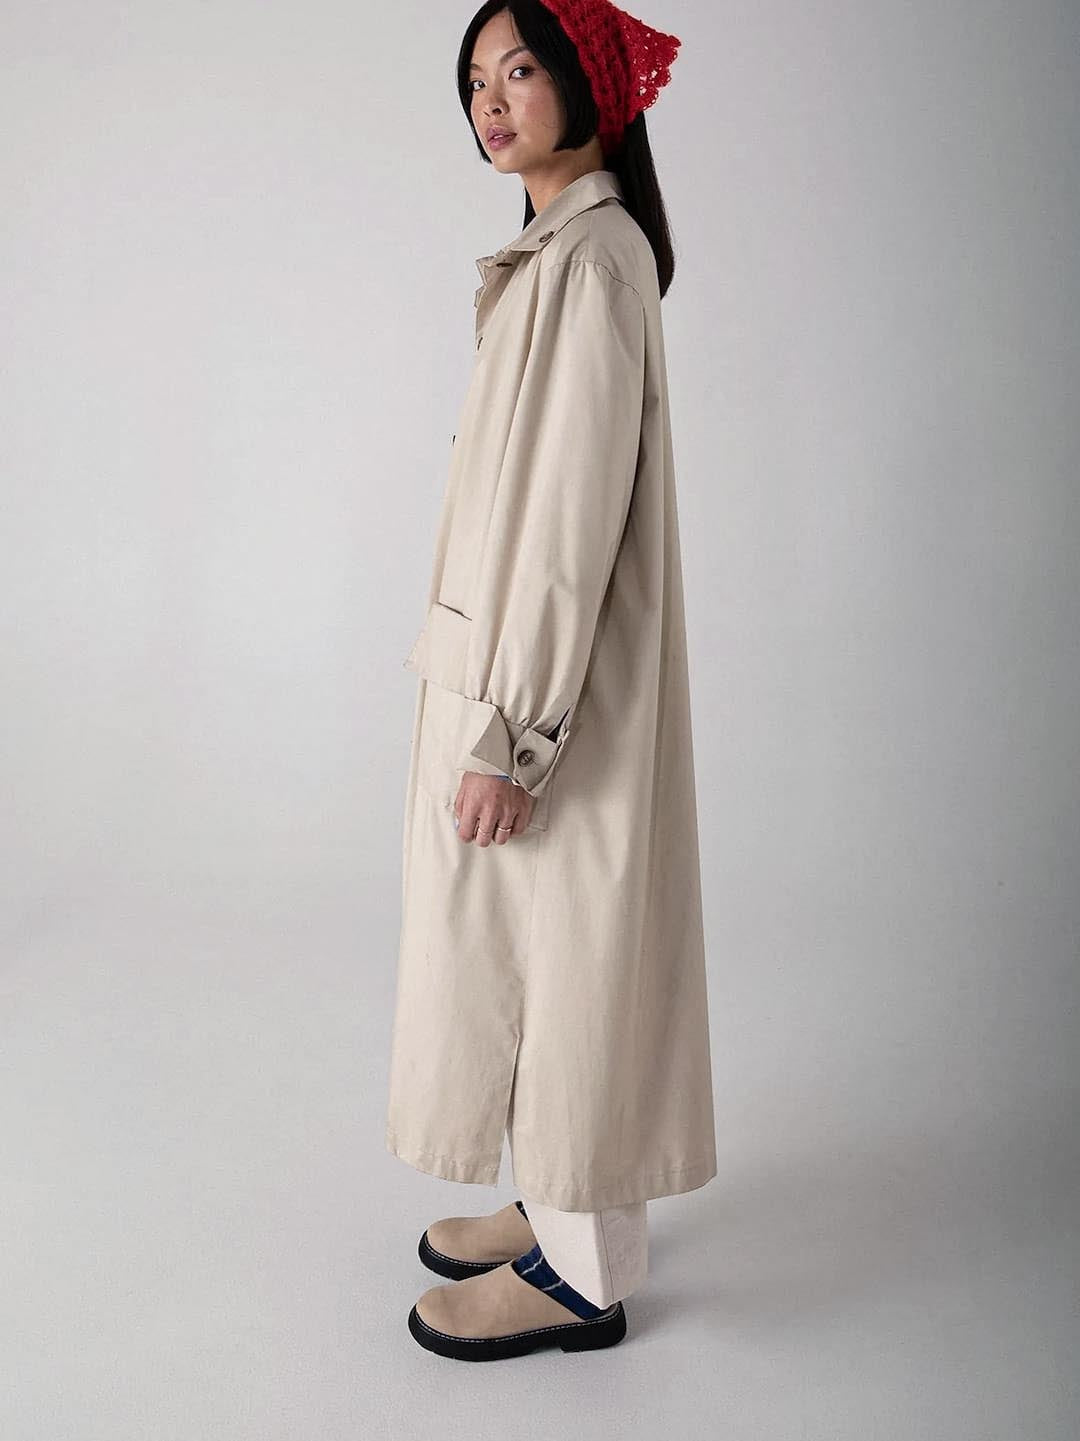 A woman stands in a neutral pose, wearing a beige trench coat, dark trousers, black strapped shoes, and Possum Merino Socks – Blue &amp; Natural Stripe by Francie.